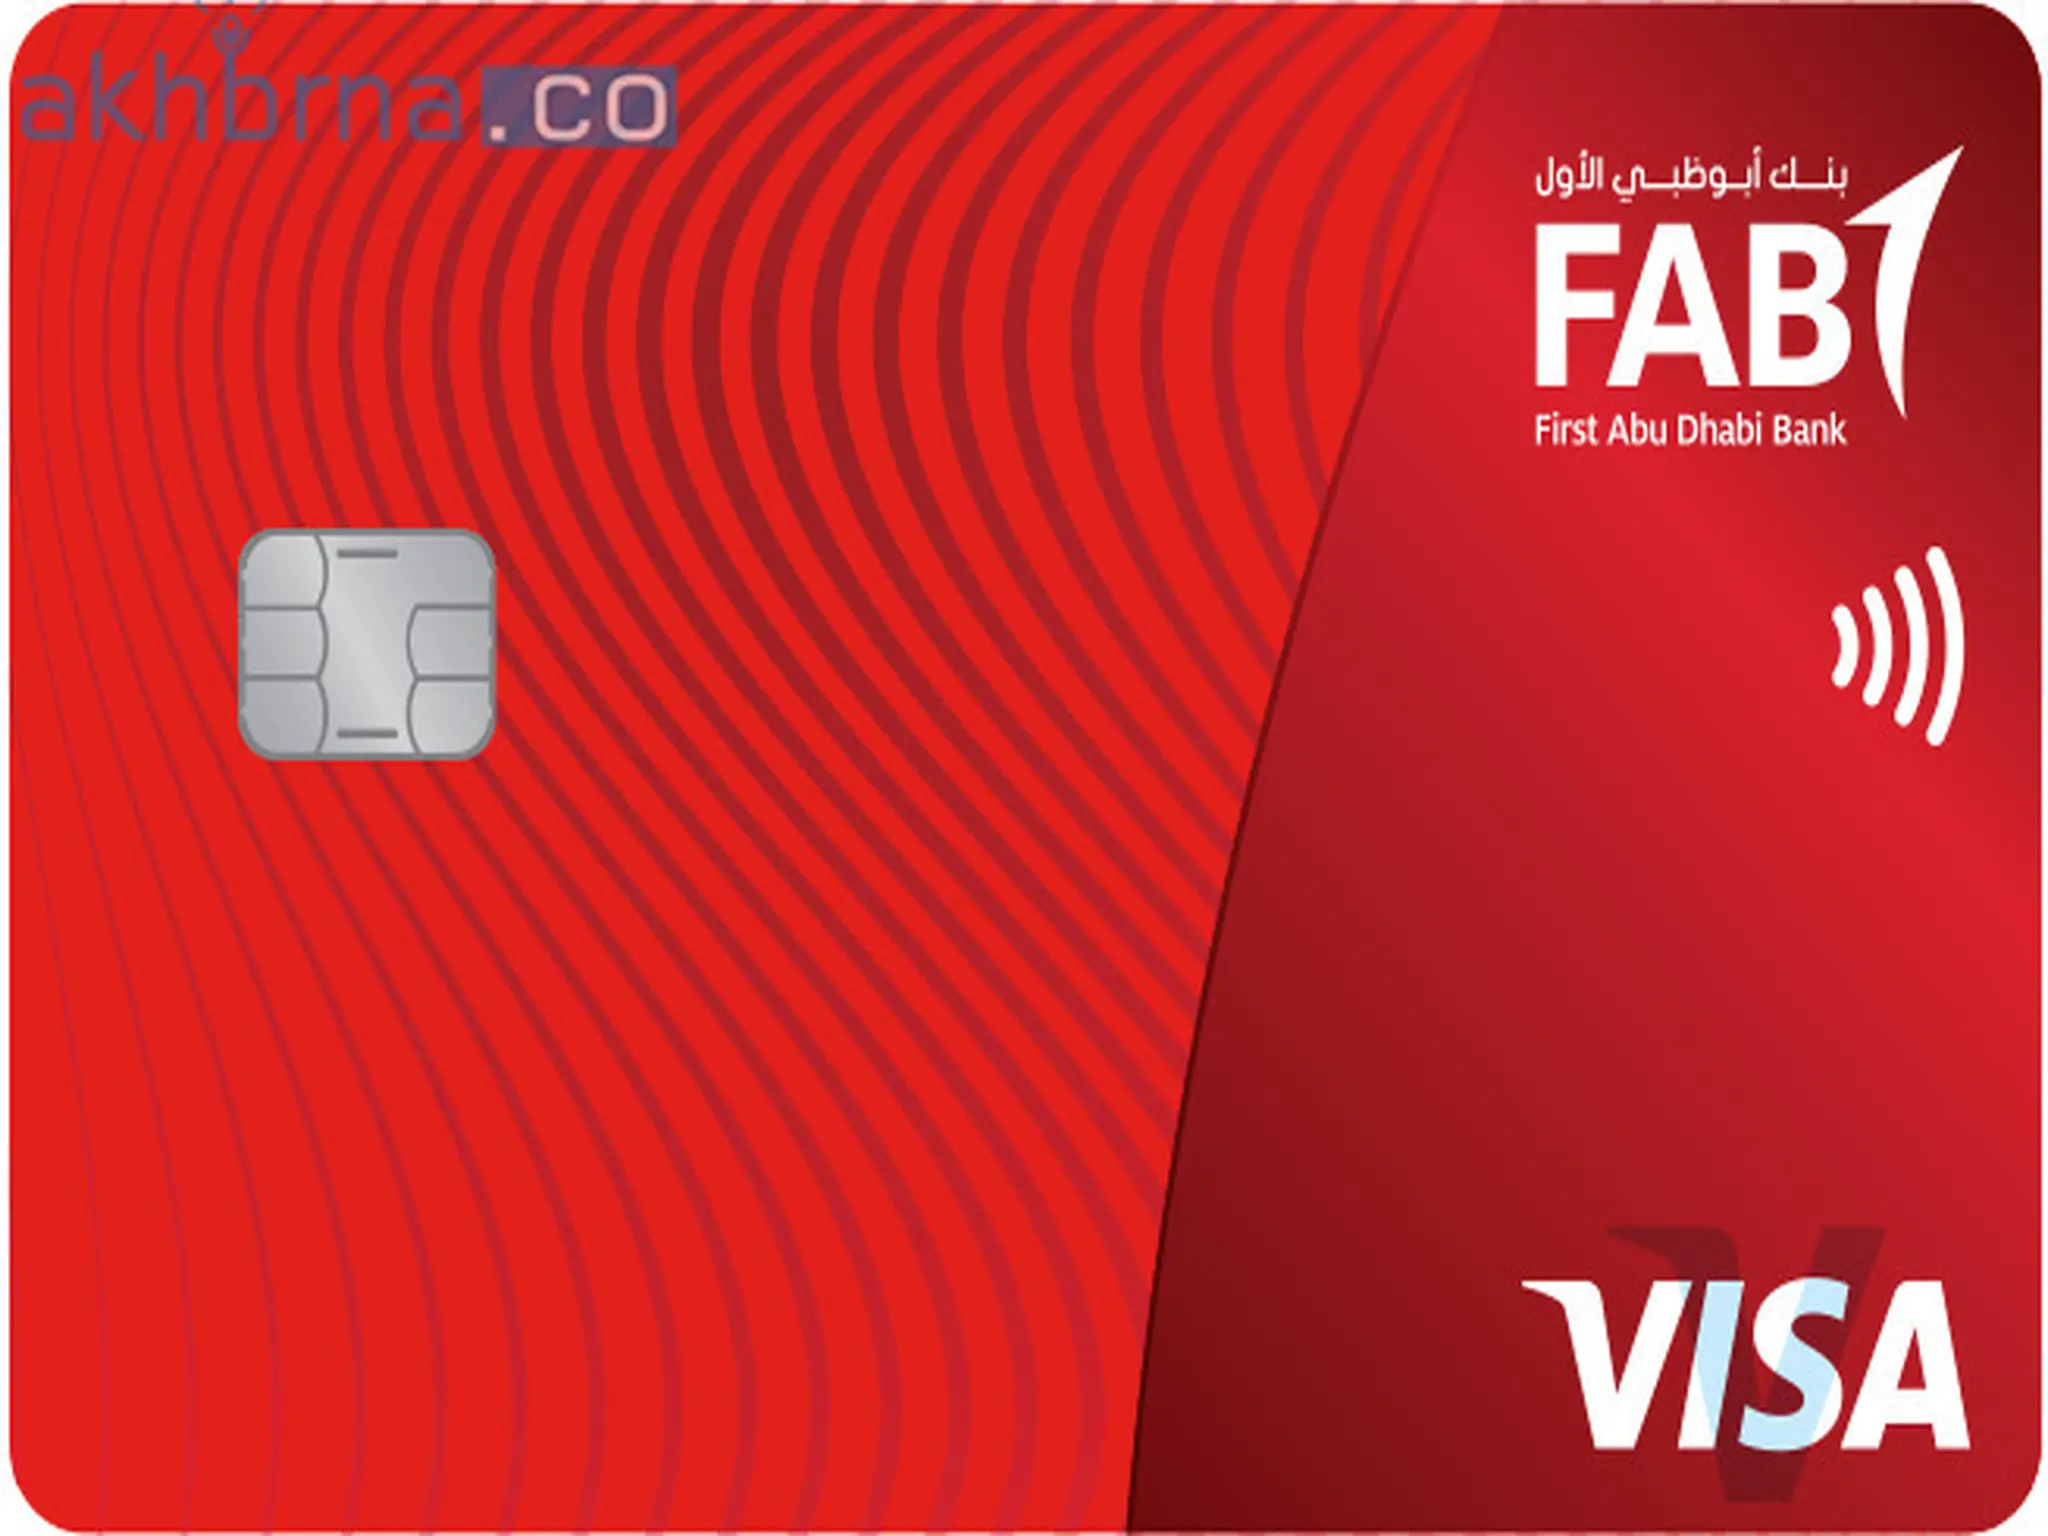 Activate Your FAB Credit Card in UAE.. A Step-by-Step Guide